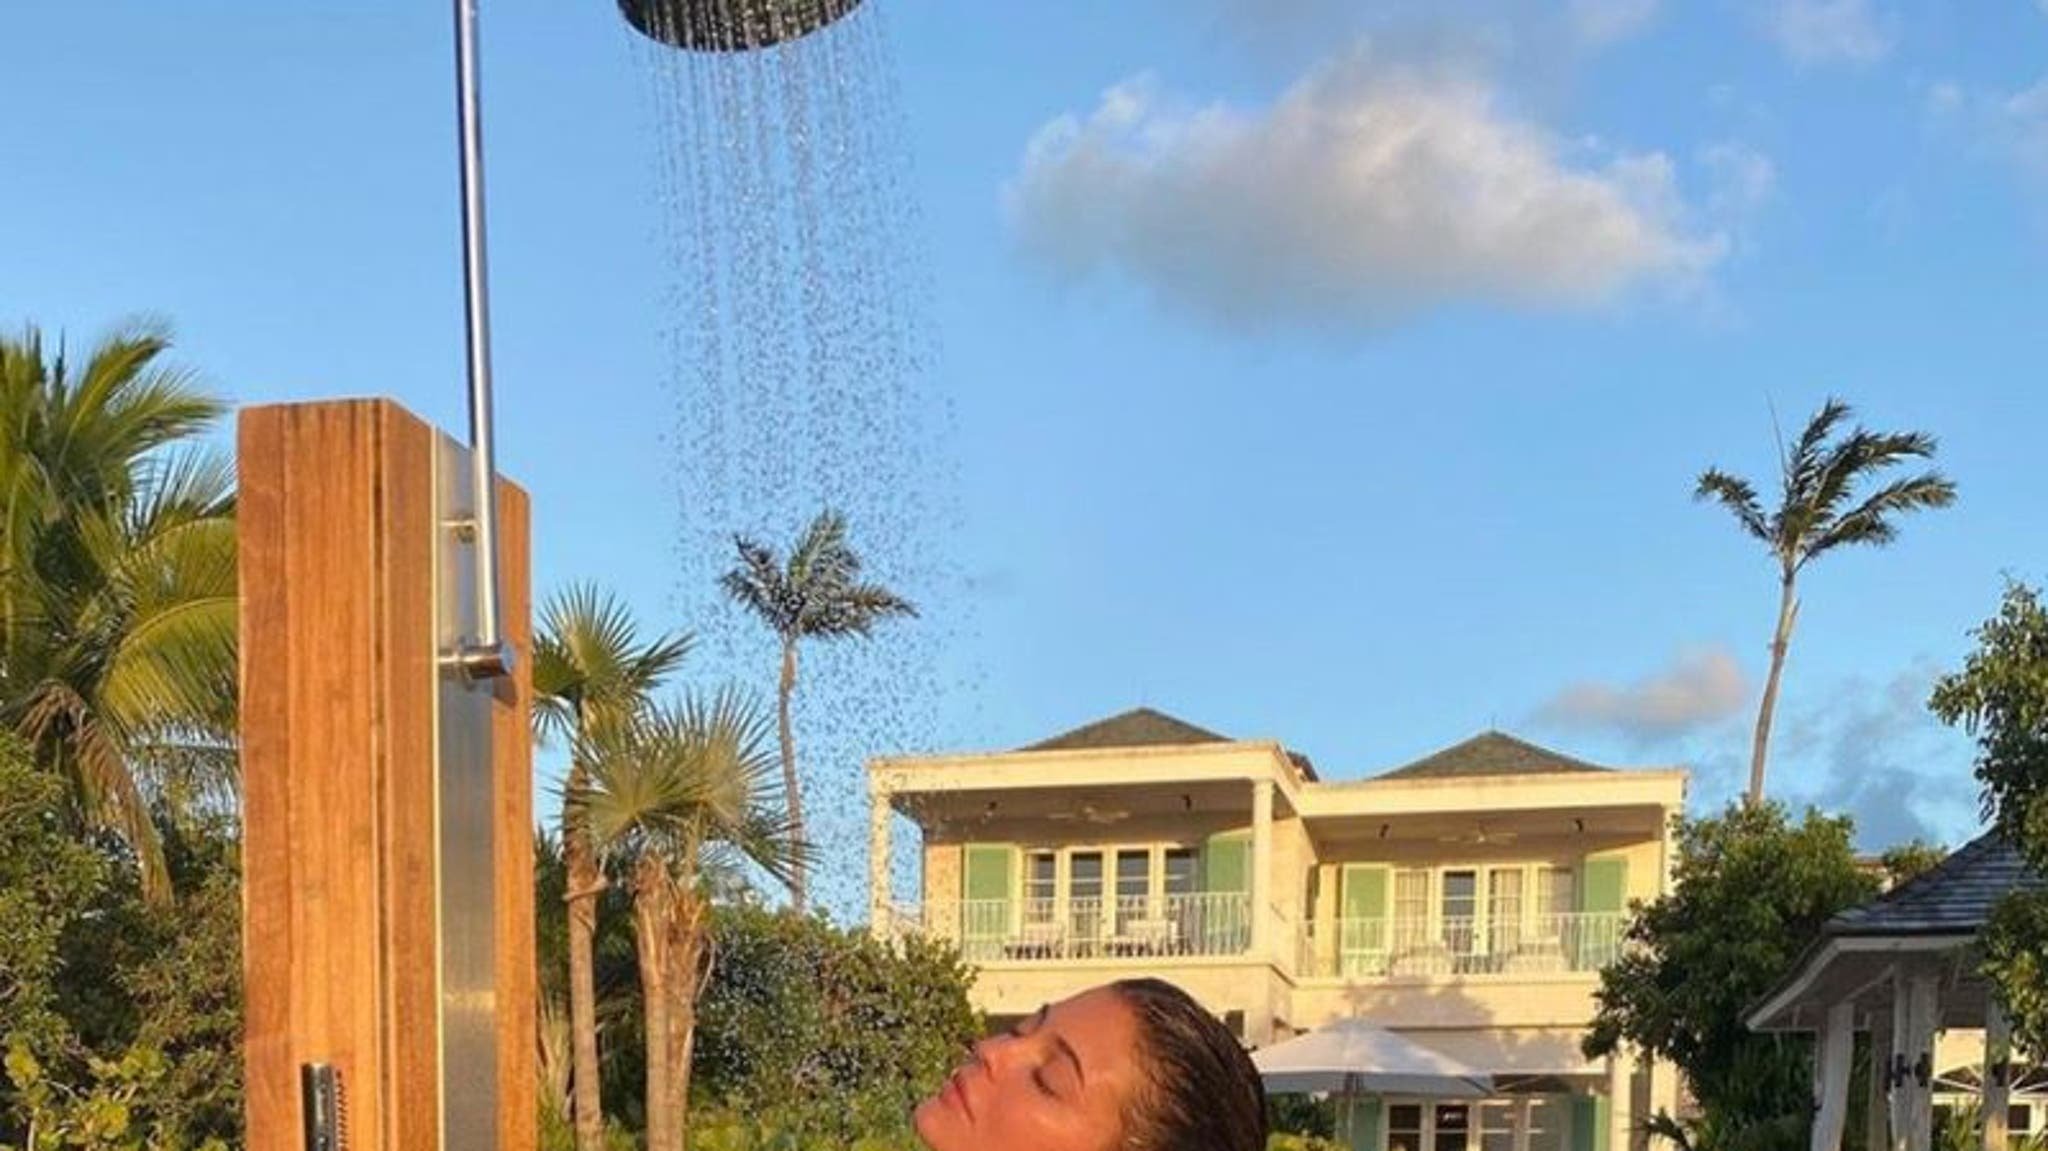 Kylie Jenner's Hot Birthday Vacation